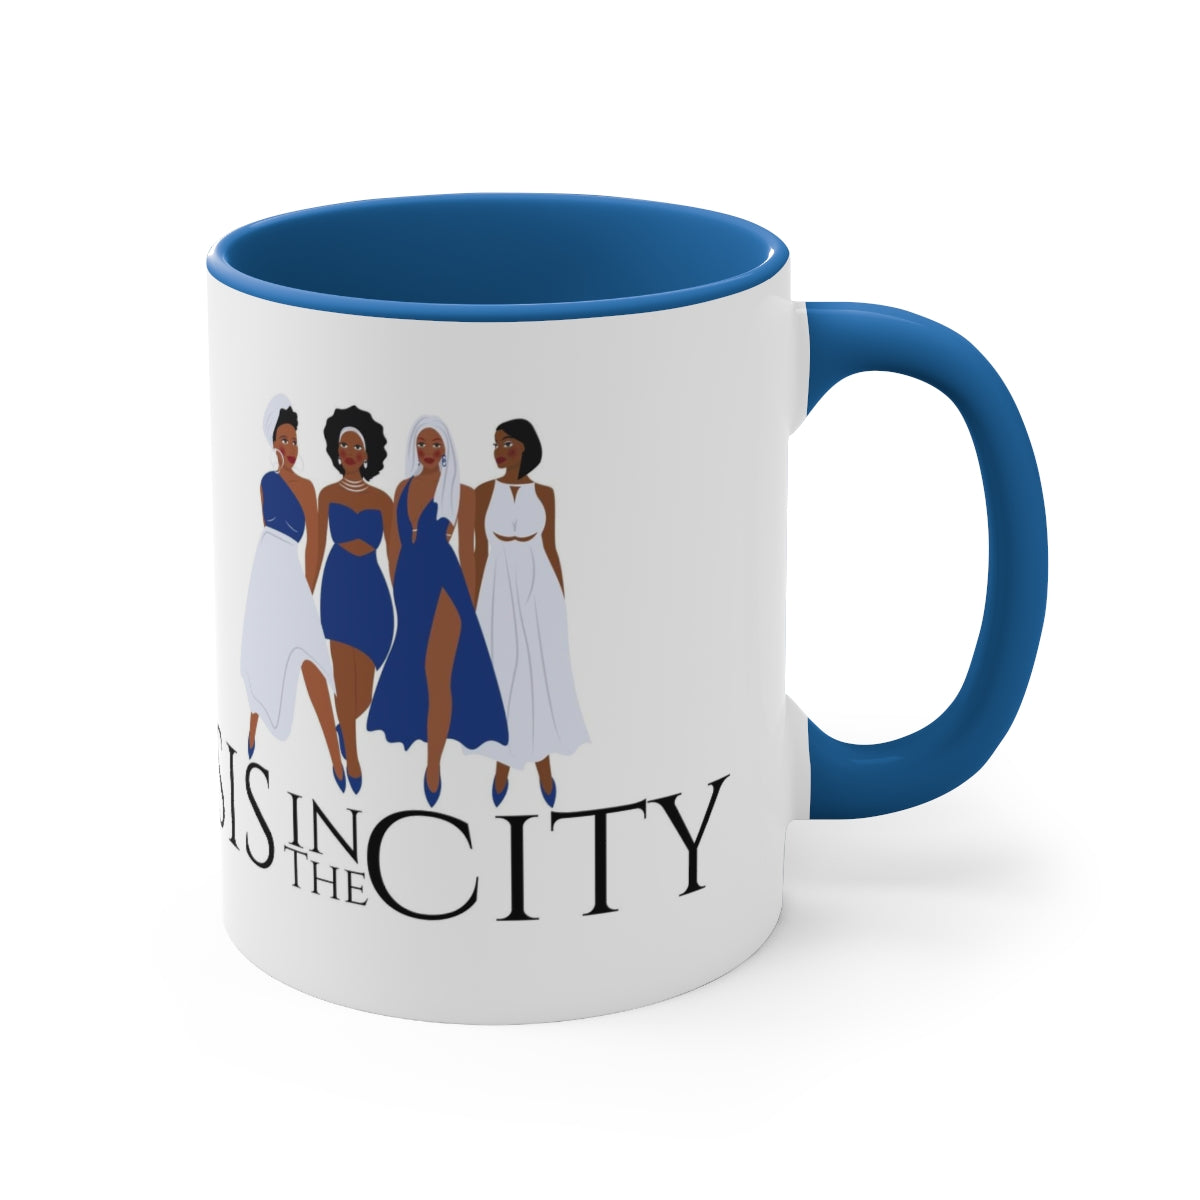 "Sis in the City" Blue & White Accent Coffee Mug, 11oz